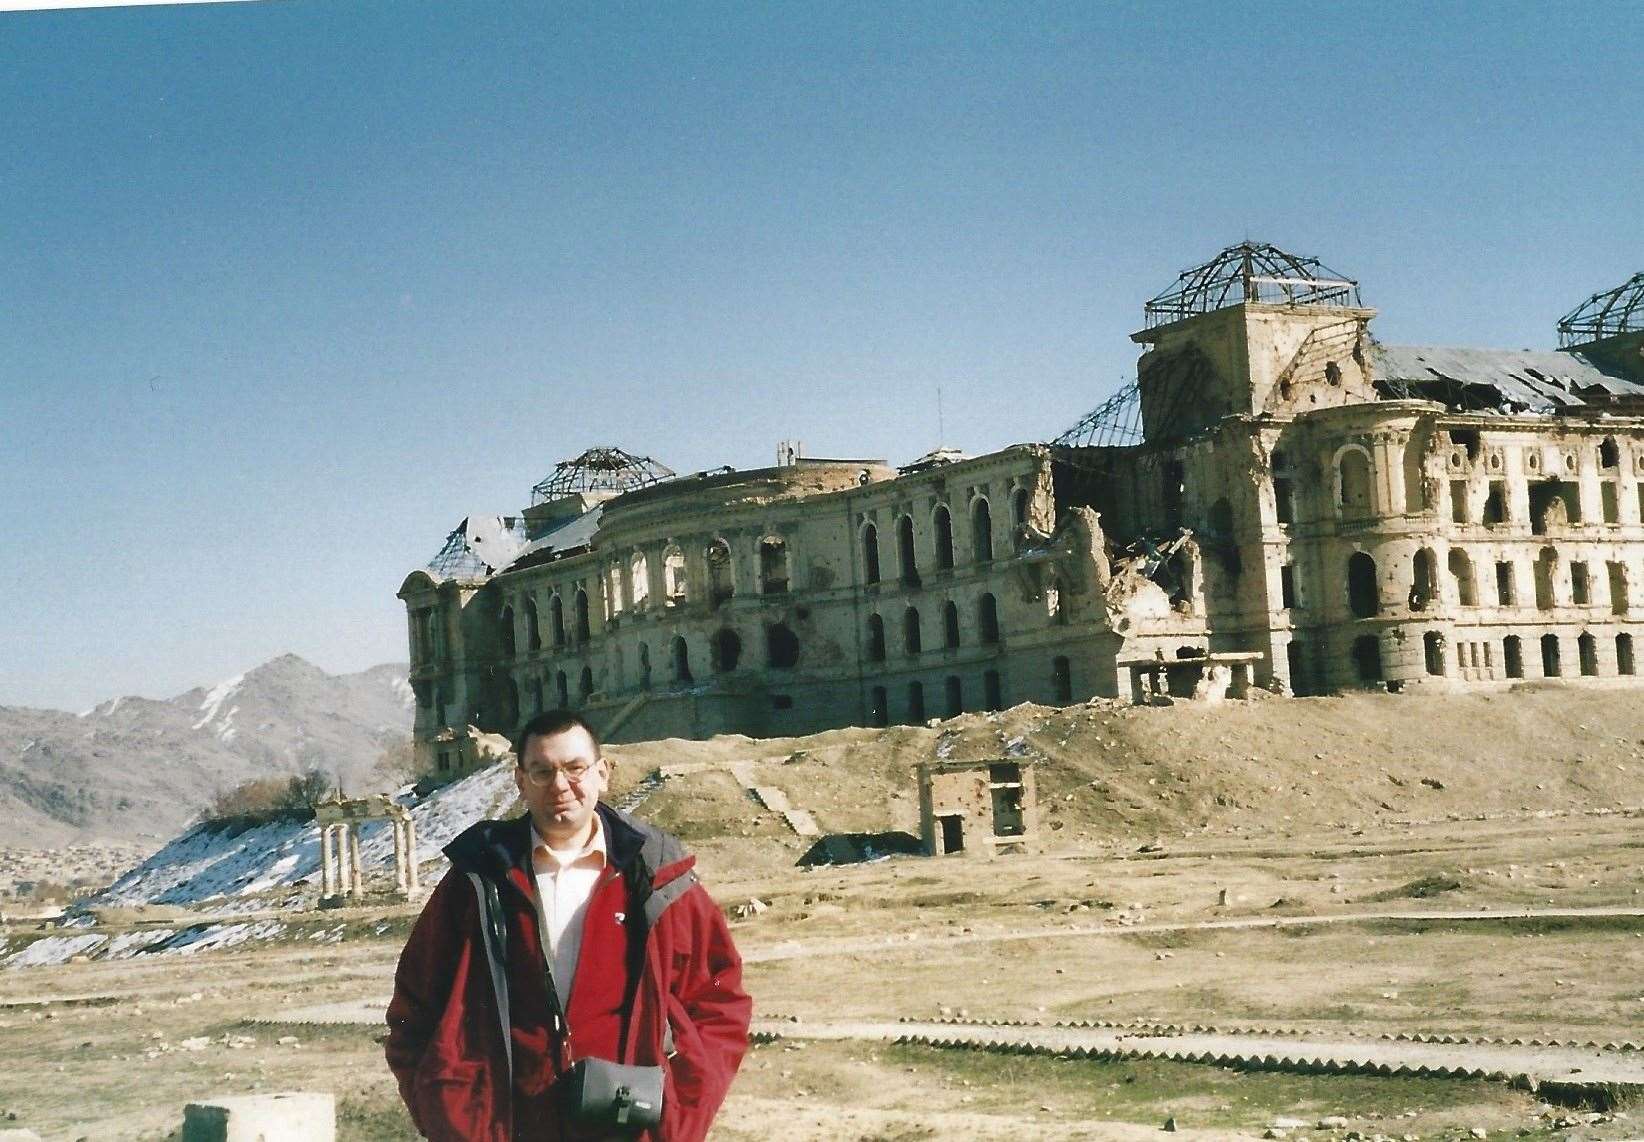 Paul Harper in front of the Daral Aman Palace near the country's National Assembly Building